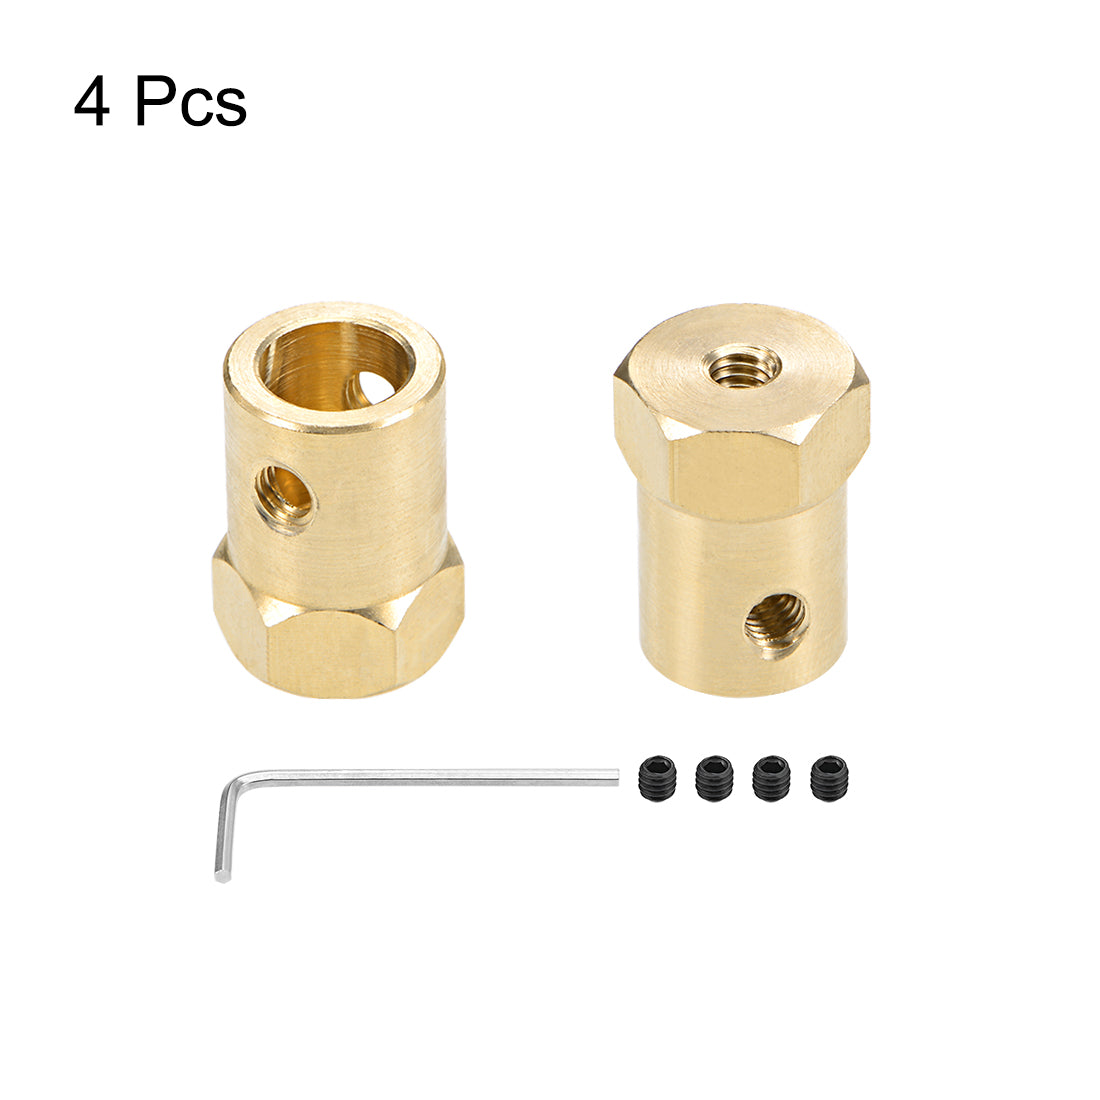 Uxcell Uxcell Hex Coupler 3mm Bore Motor Hex Brass Shaft Coupling Connector for Car Wheels Tires Shaft Motor 4pcs